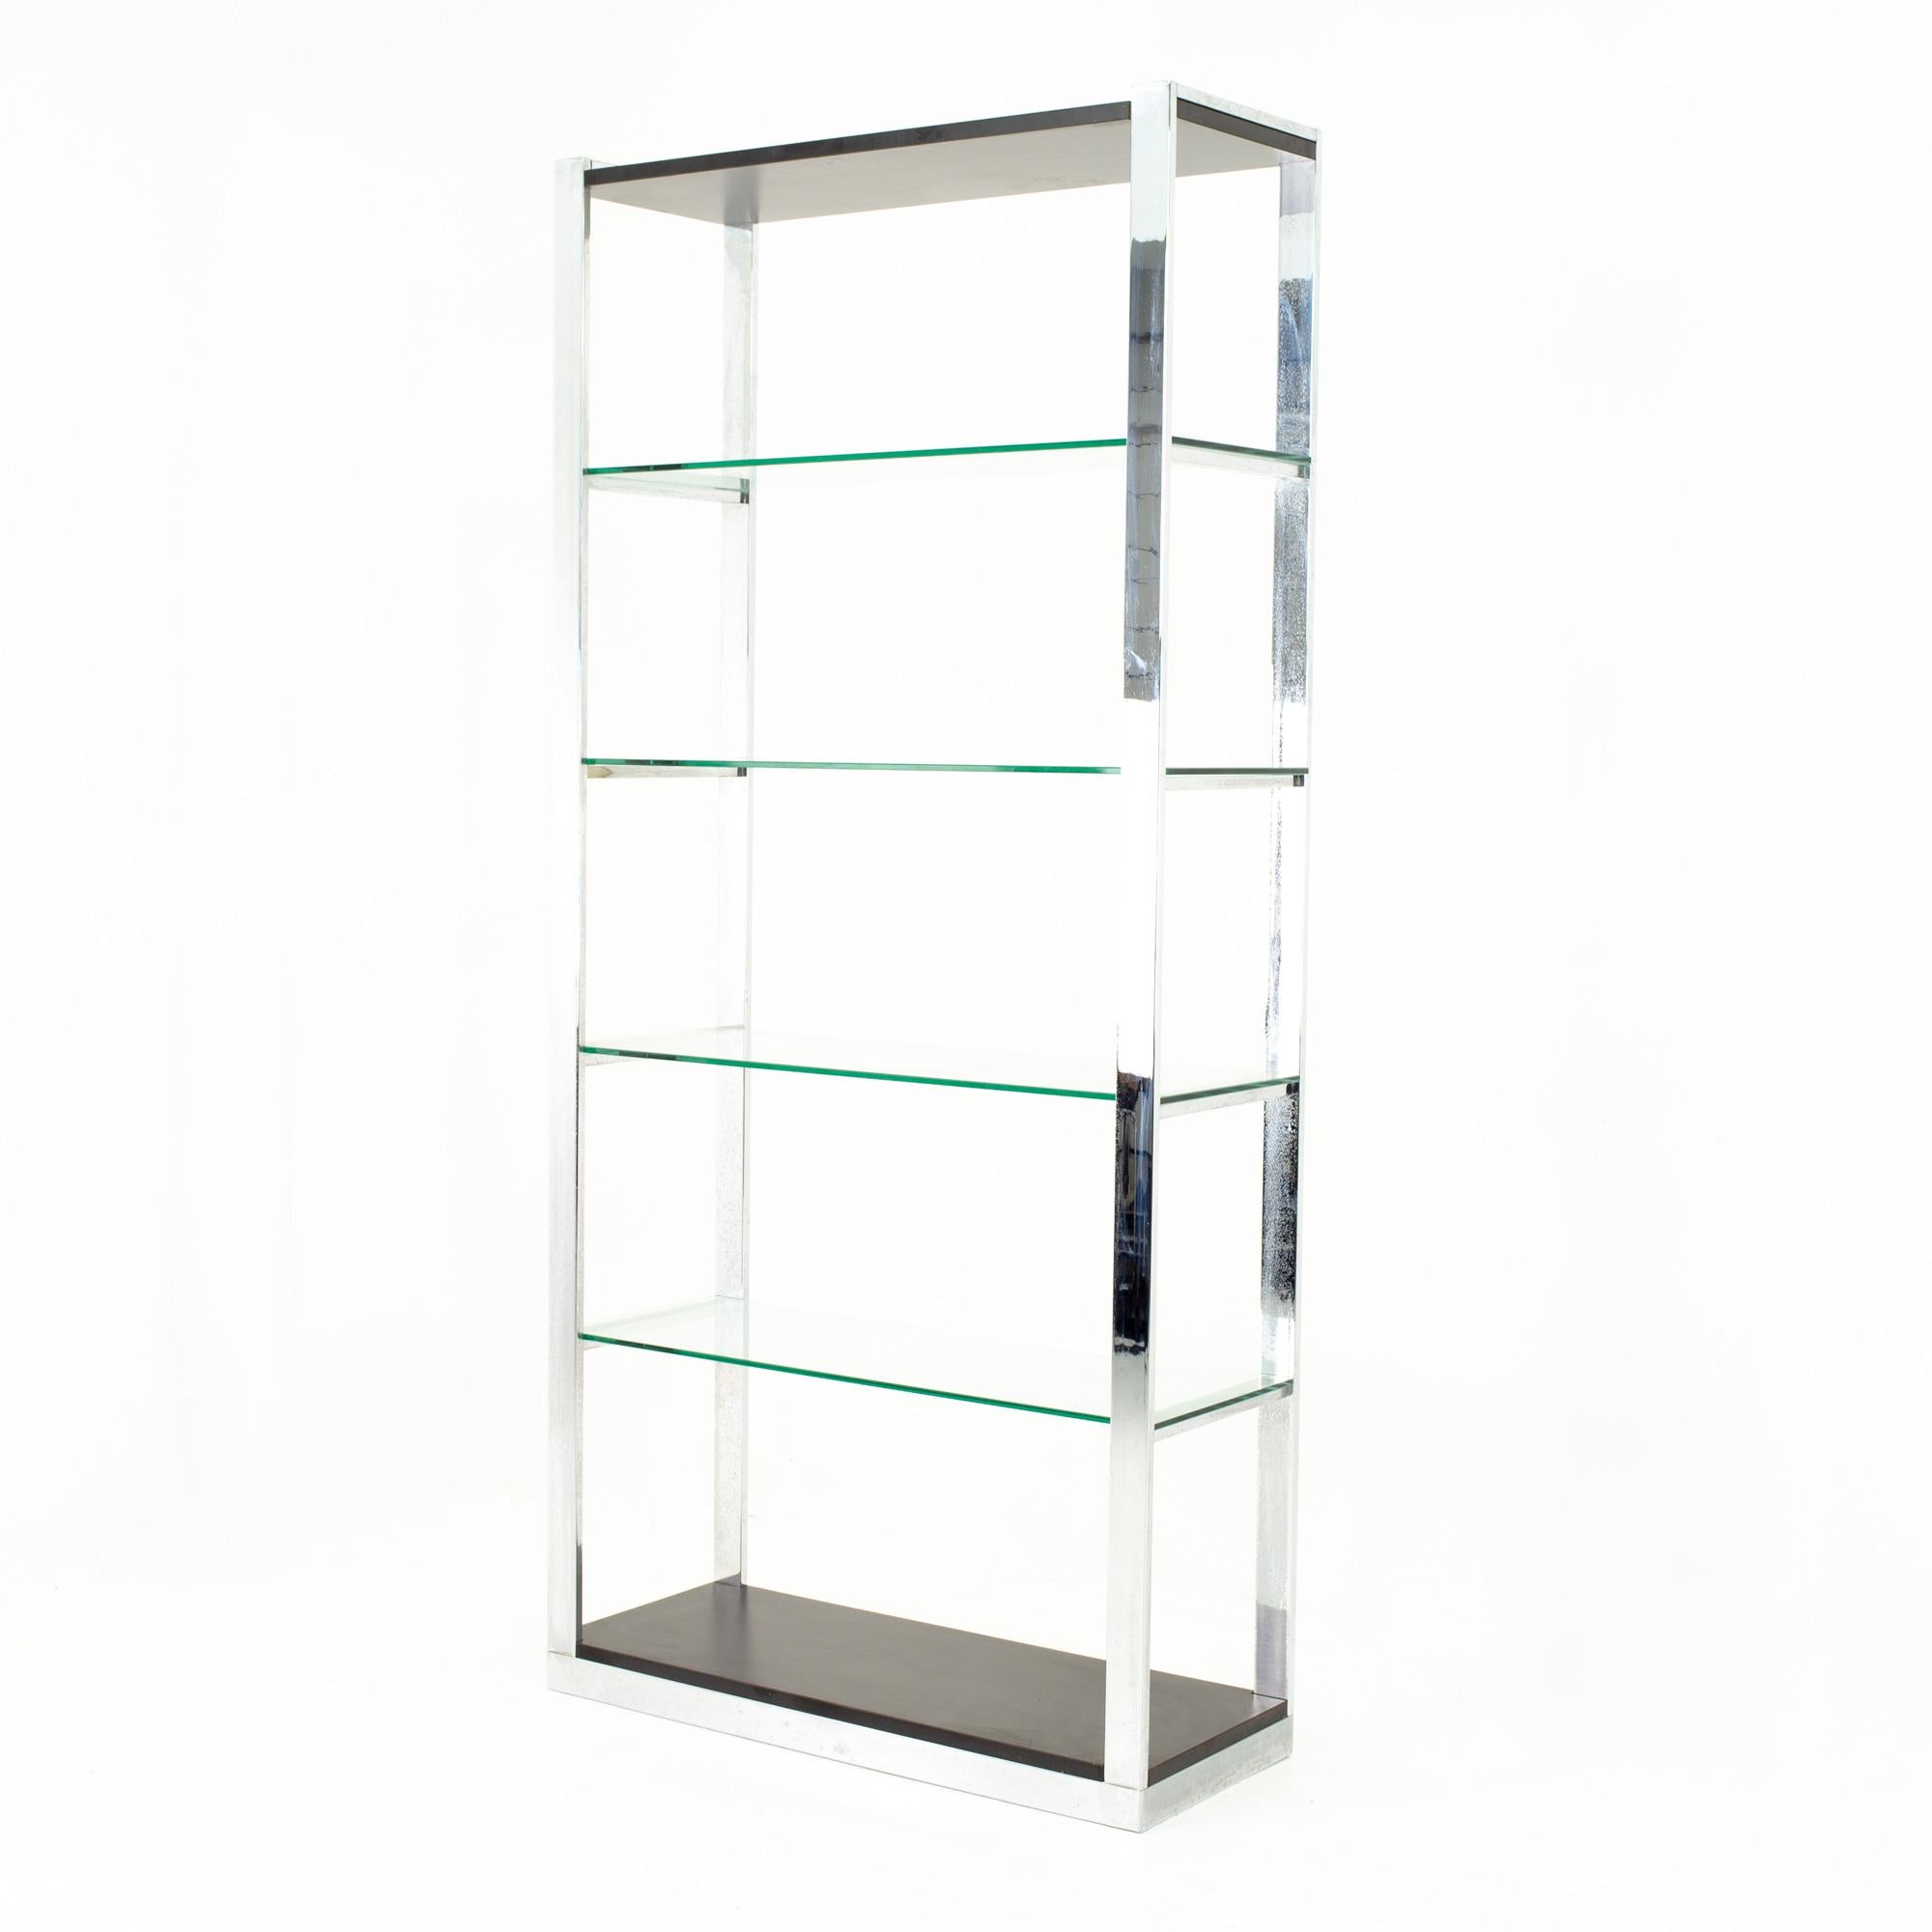 Milo Baughman style Mid Century chrome and glass shelf
Shelf measures: 36 wide x 14 deep x 78 high

This price includes getting this set in what we call restored vintage condition. Upon purchase it is fixed so it’s free of watermarks, chips or deep